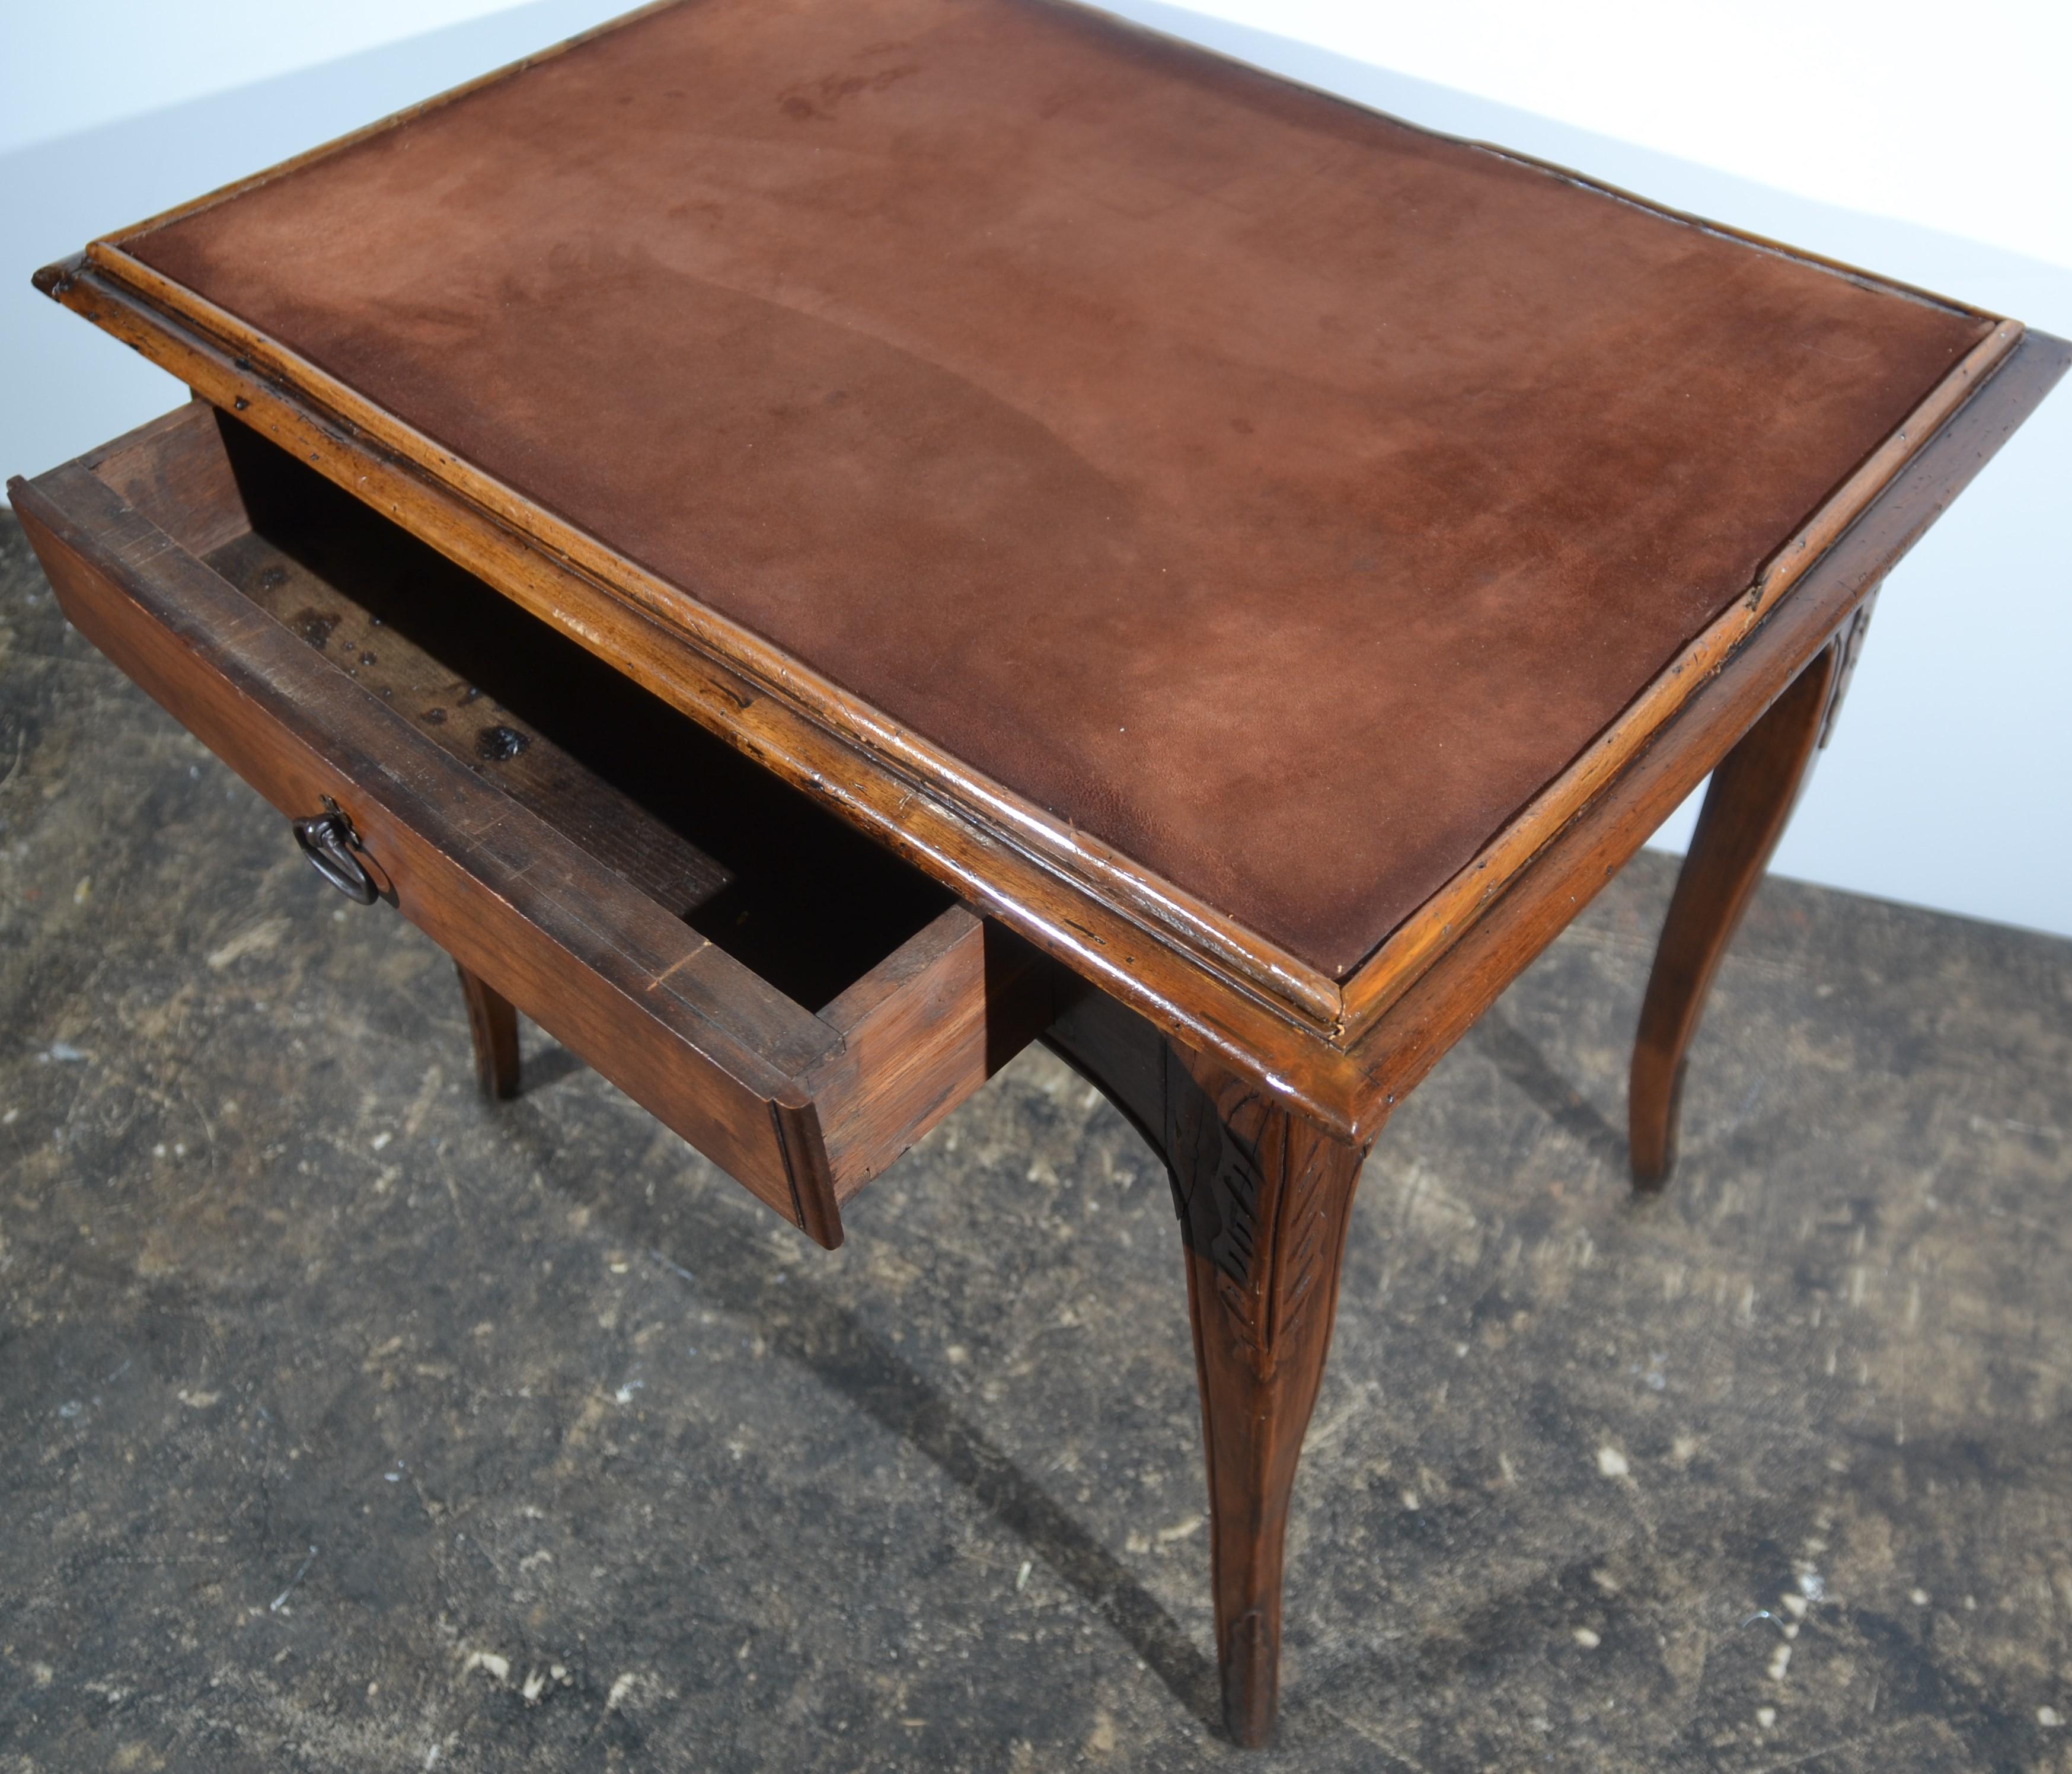 A late 19th century French Provincial side table or ladies desk in fruitwood. Single drawer with original iron loop handle. Acanthus leaf carving to the legs and below the drawer. Shell style carving to the sides. The top with an applied brown soft